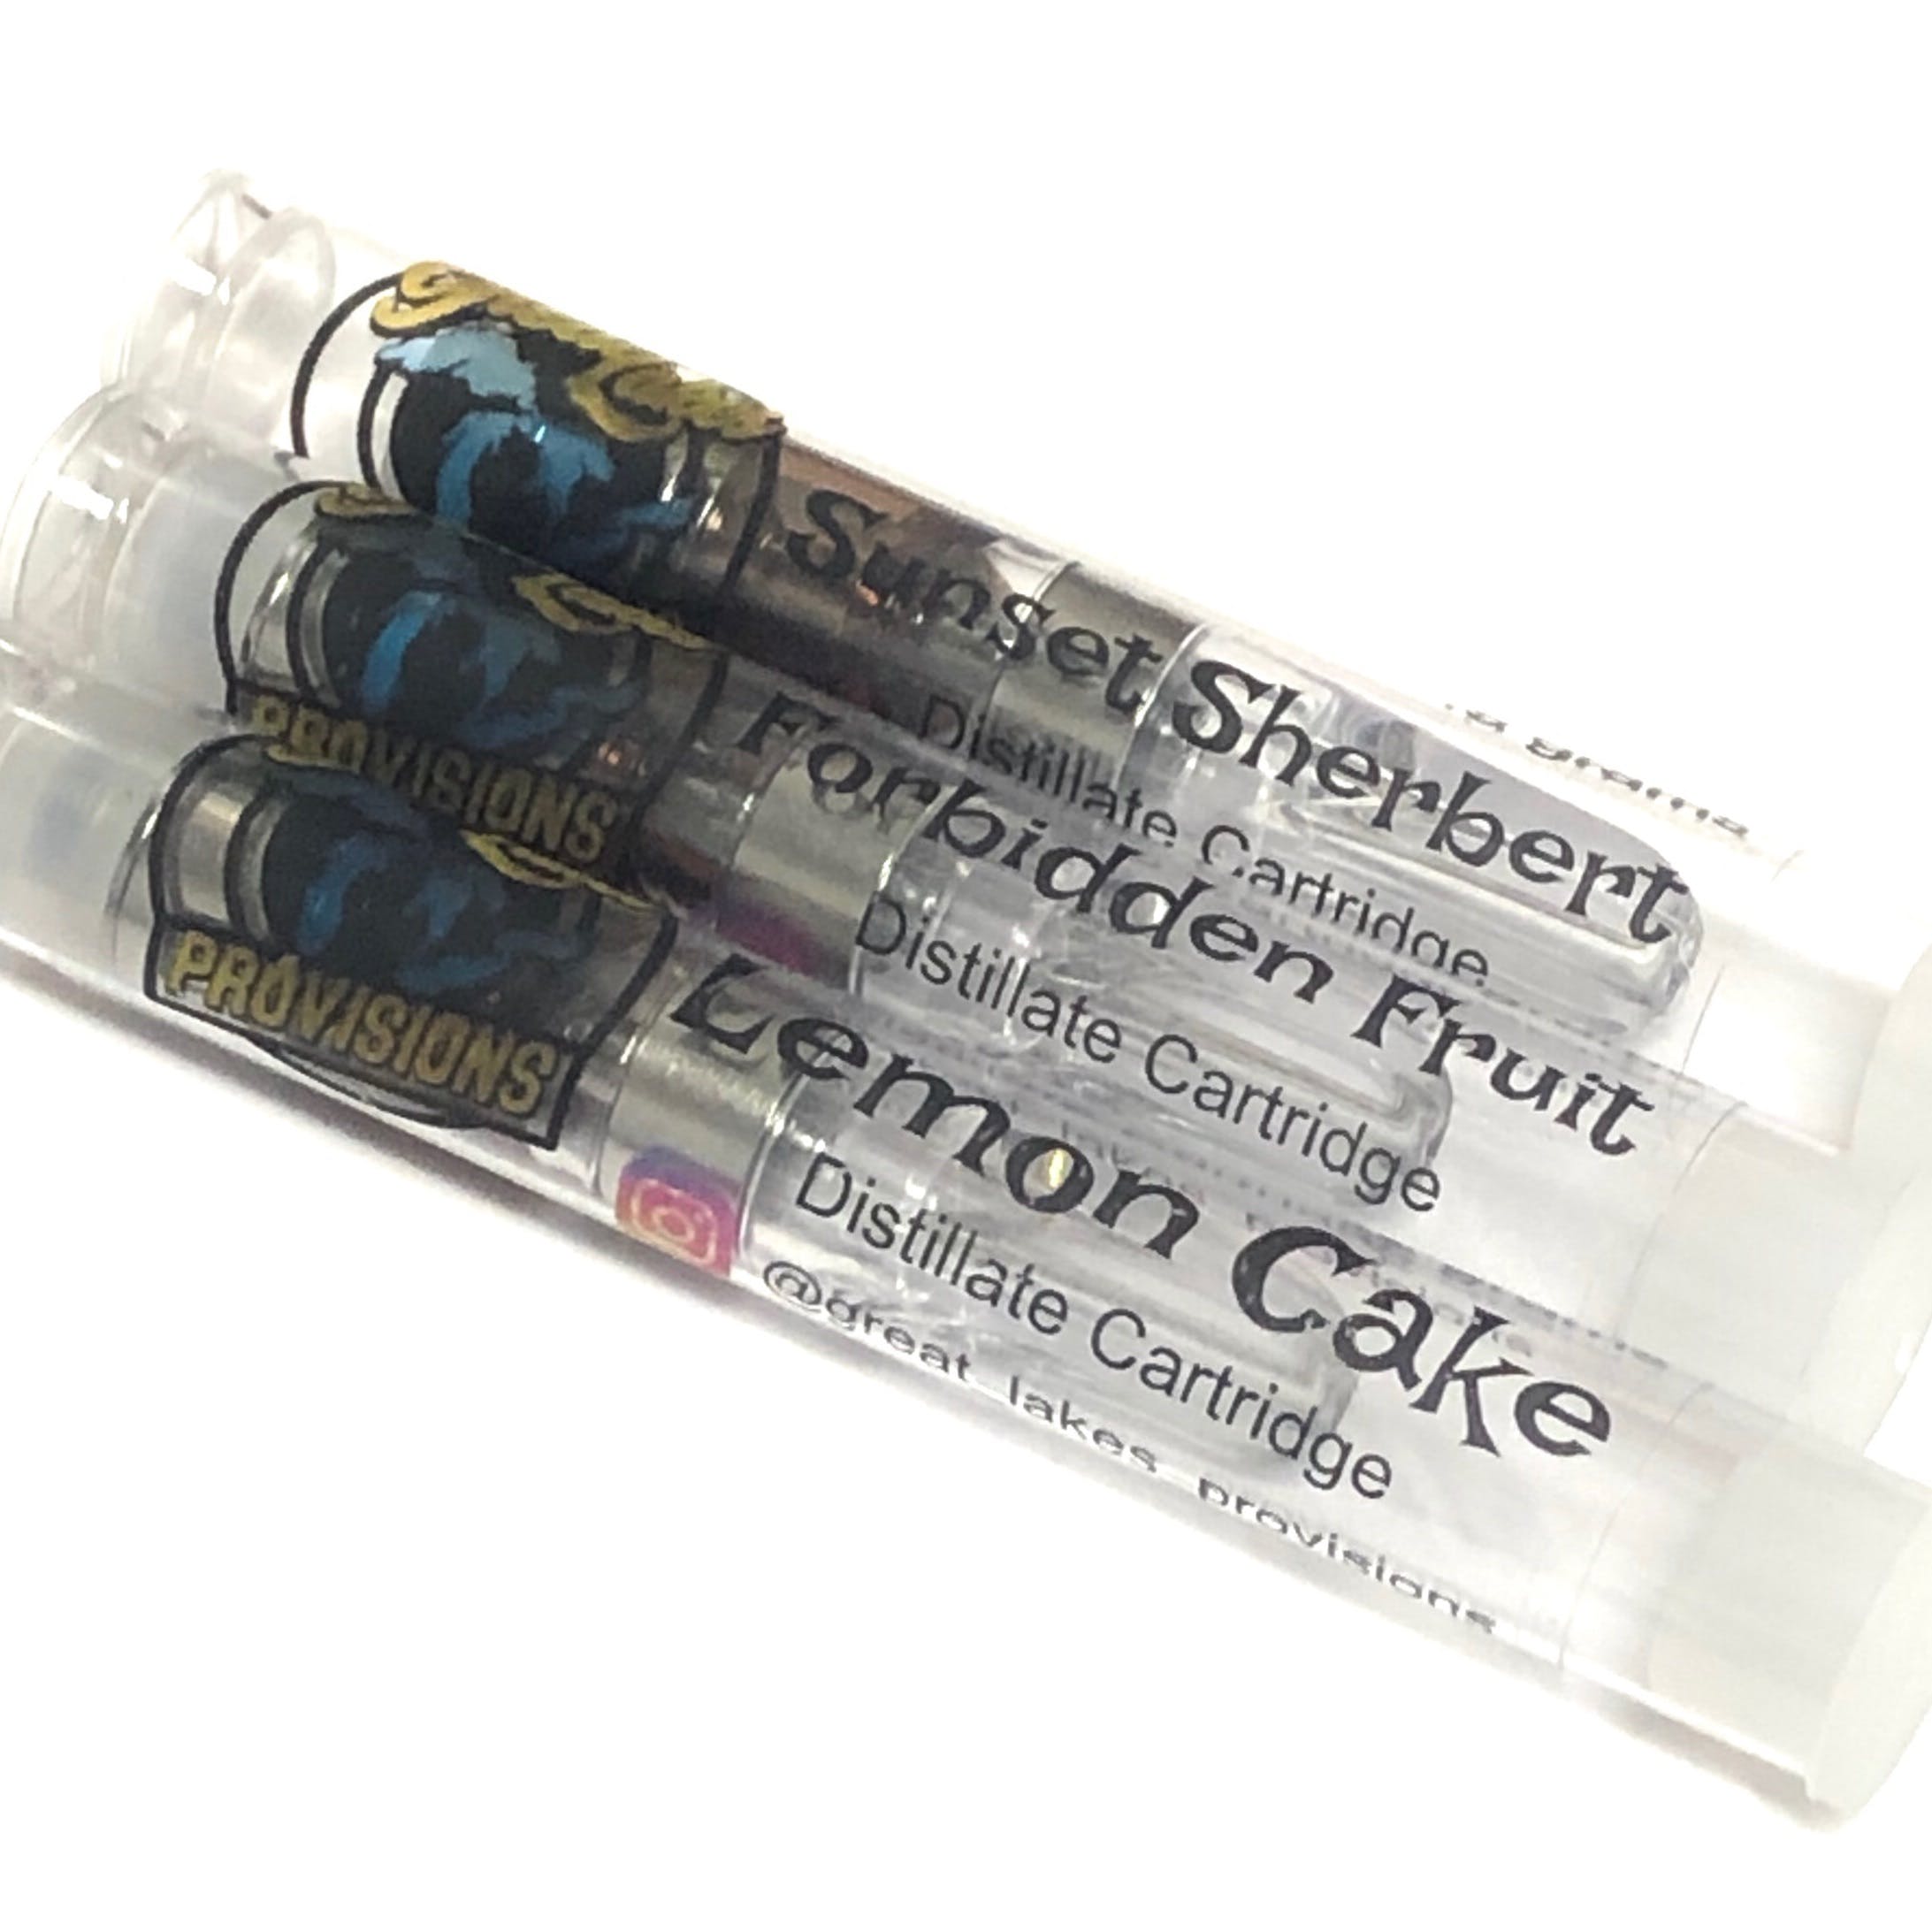 concentrate-great-lake-provisions-carts-12-gram-4-24100